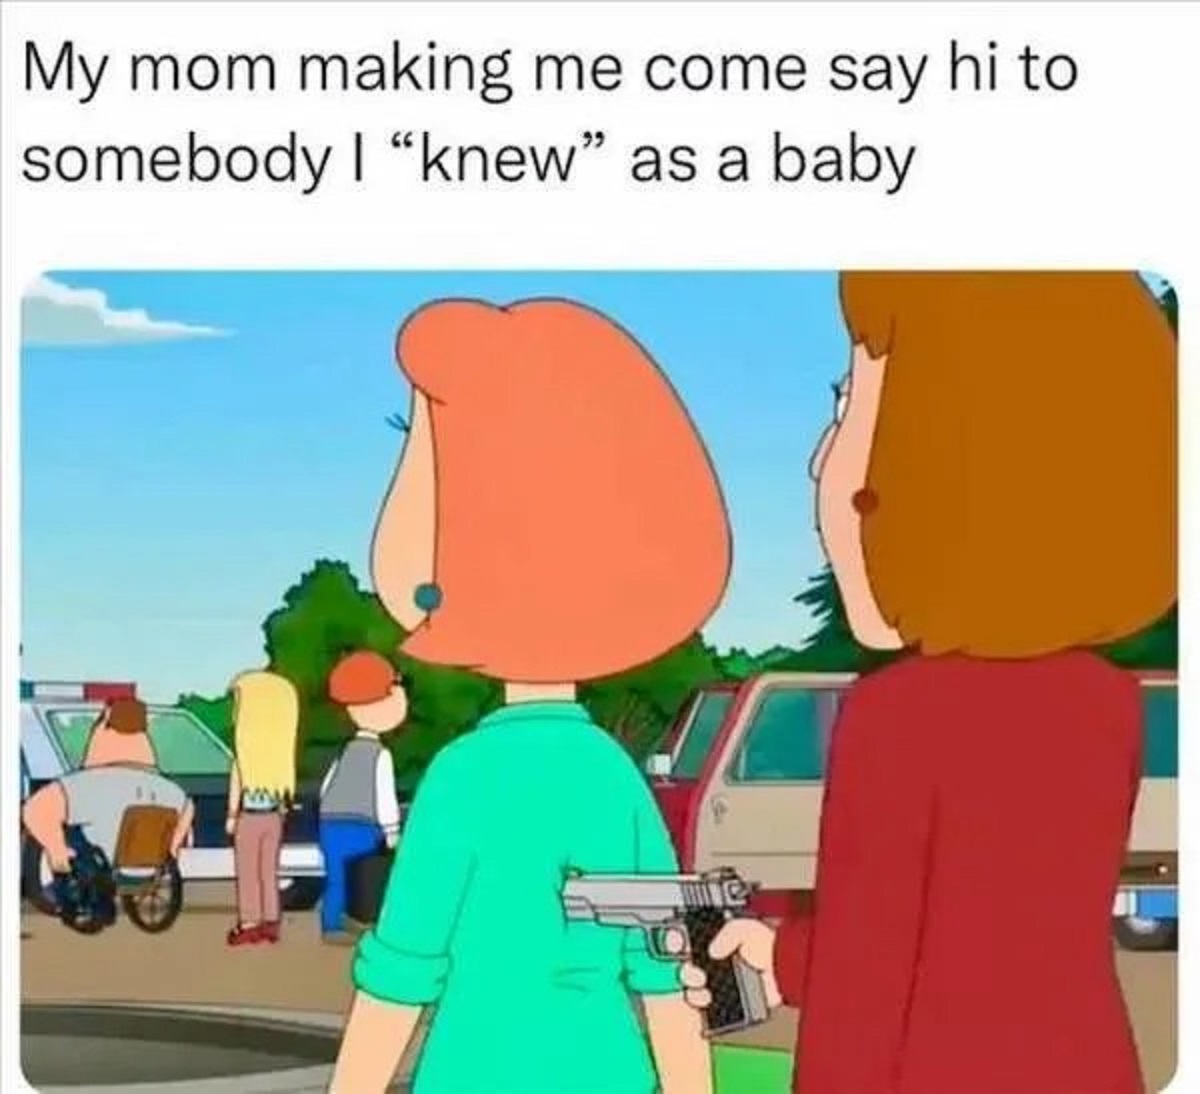 rupaul jujubee meme - My mom making me come say hi to somebody I "knew" as a baby